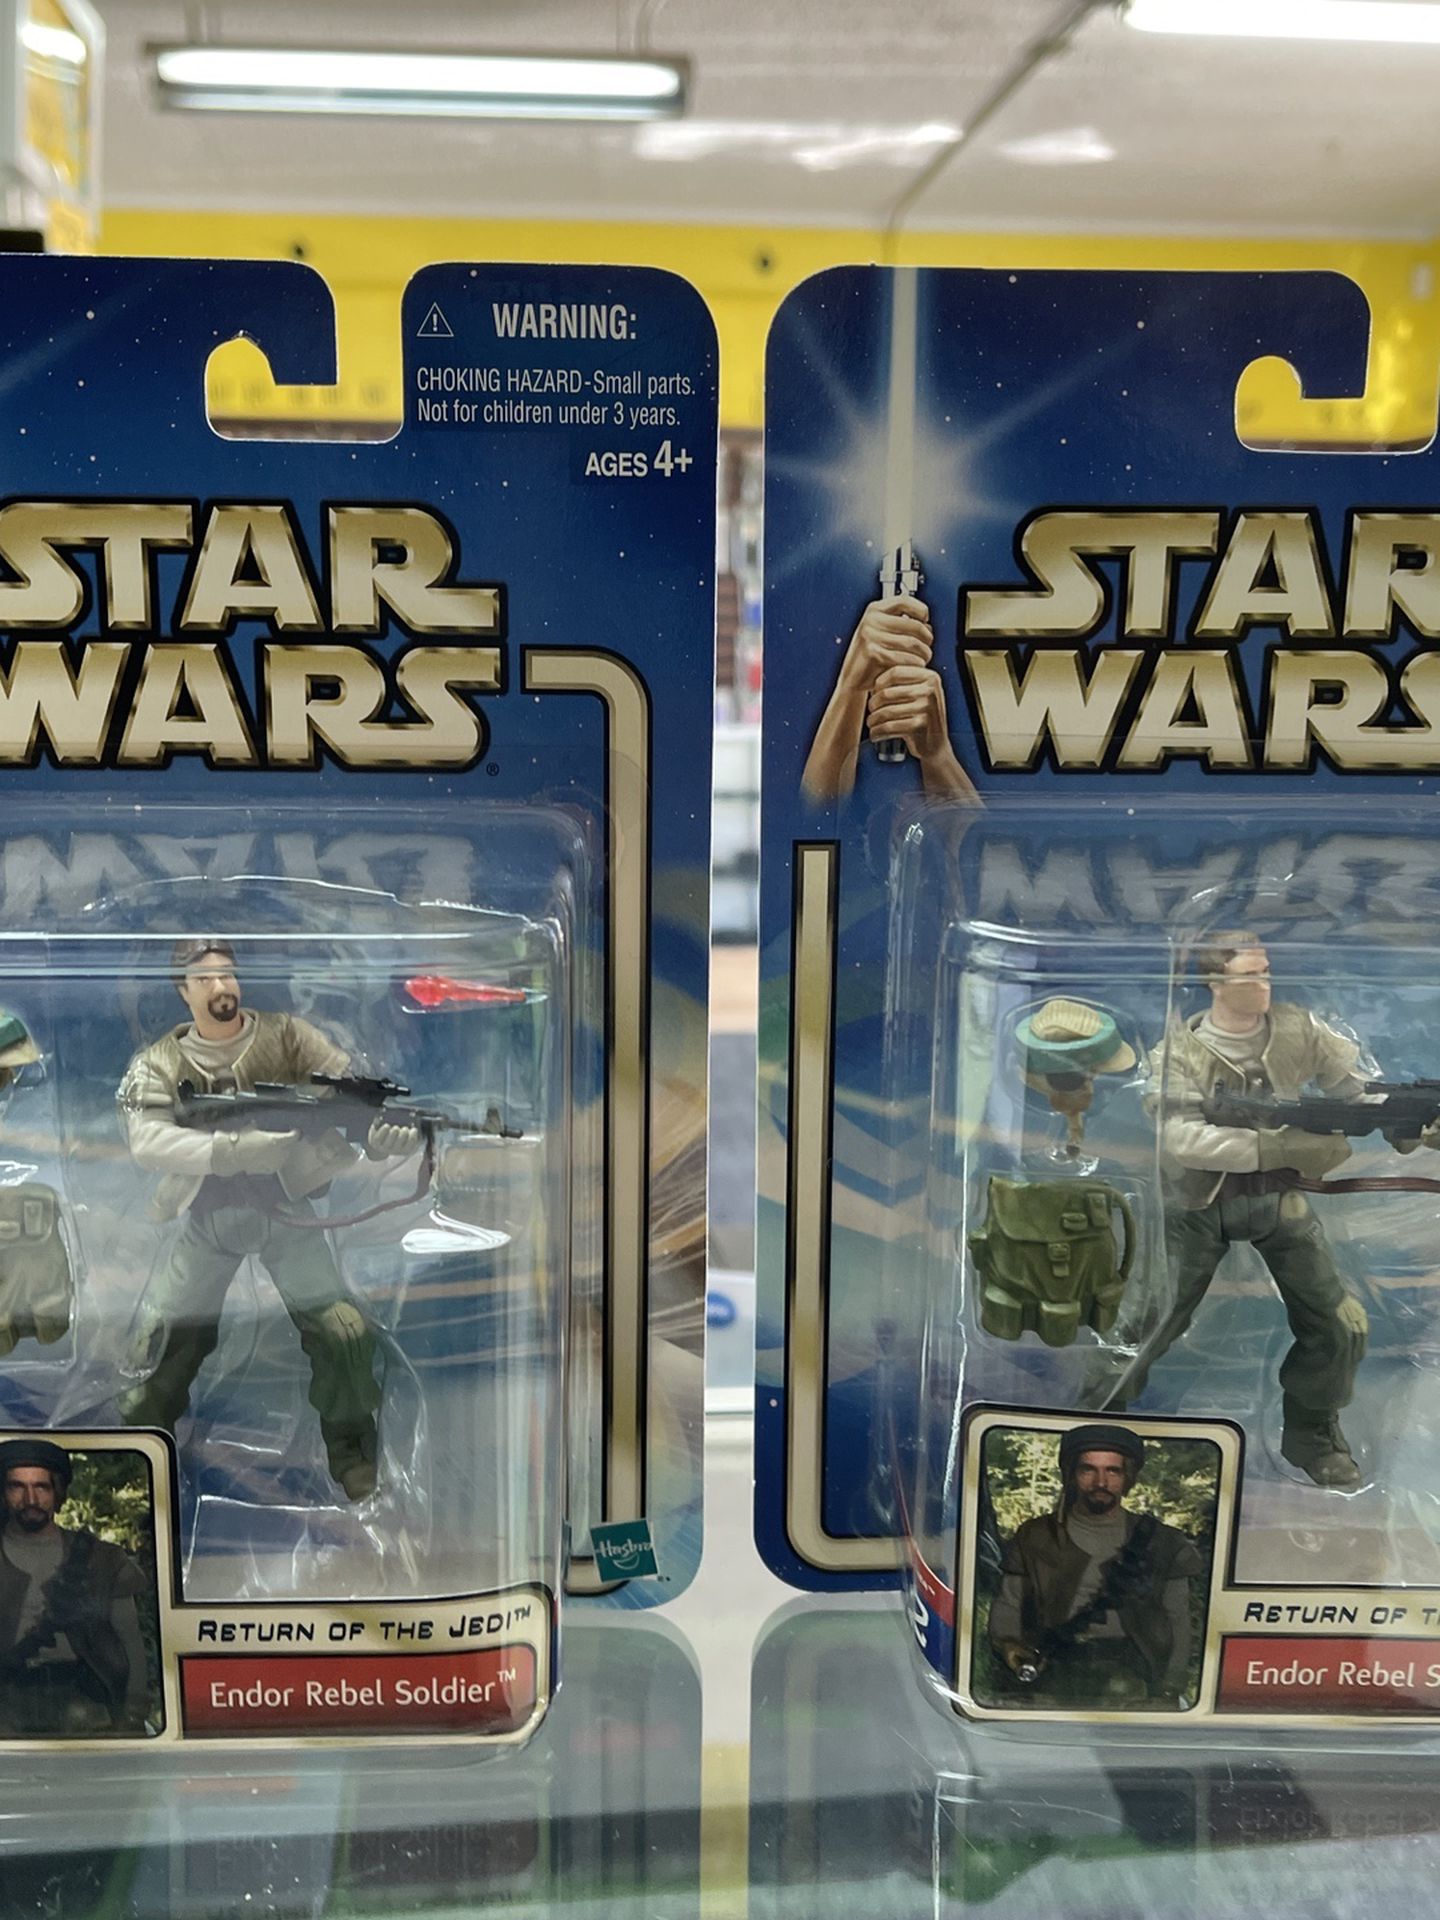 Lot of 2 STAR WARS RETURN OF THE JEDI ENDOR REBEL SOLDIER WITH & WITHOUT BEARD